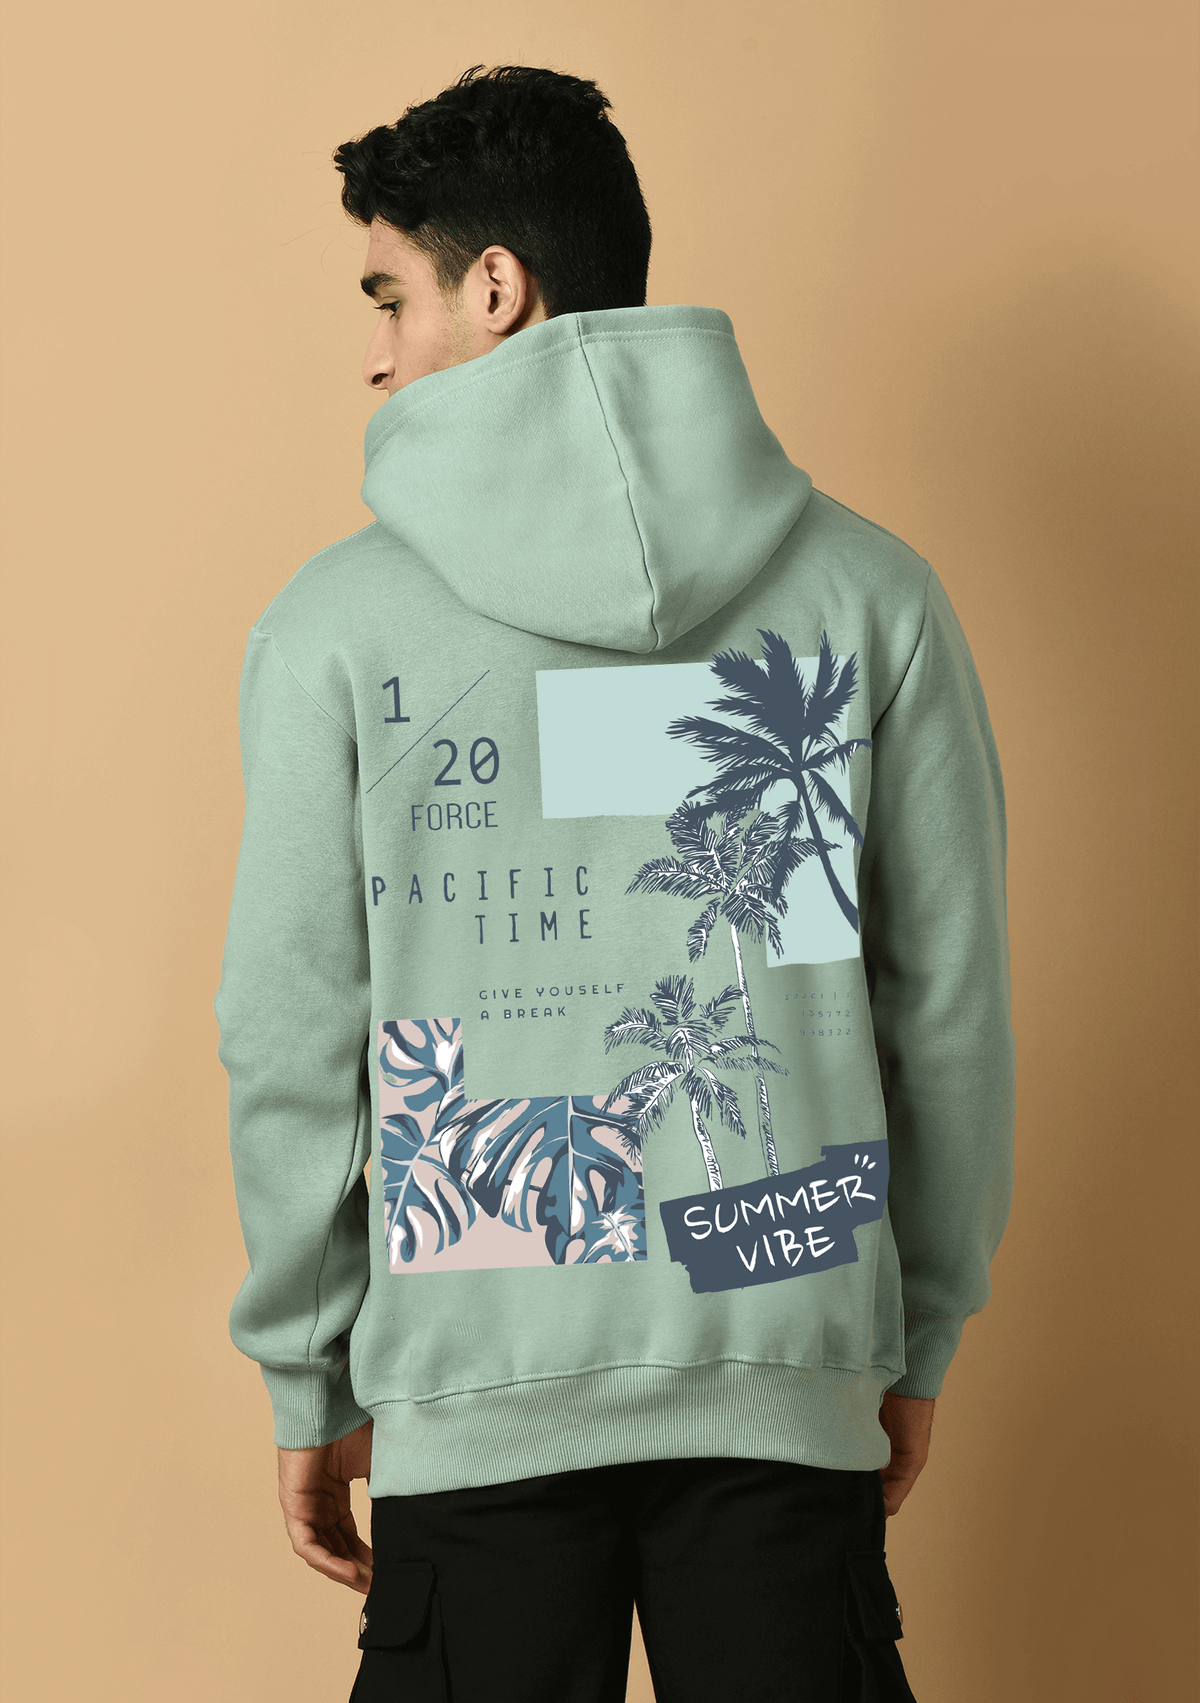 Paradise printed sage green color hoodie by offmint